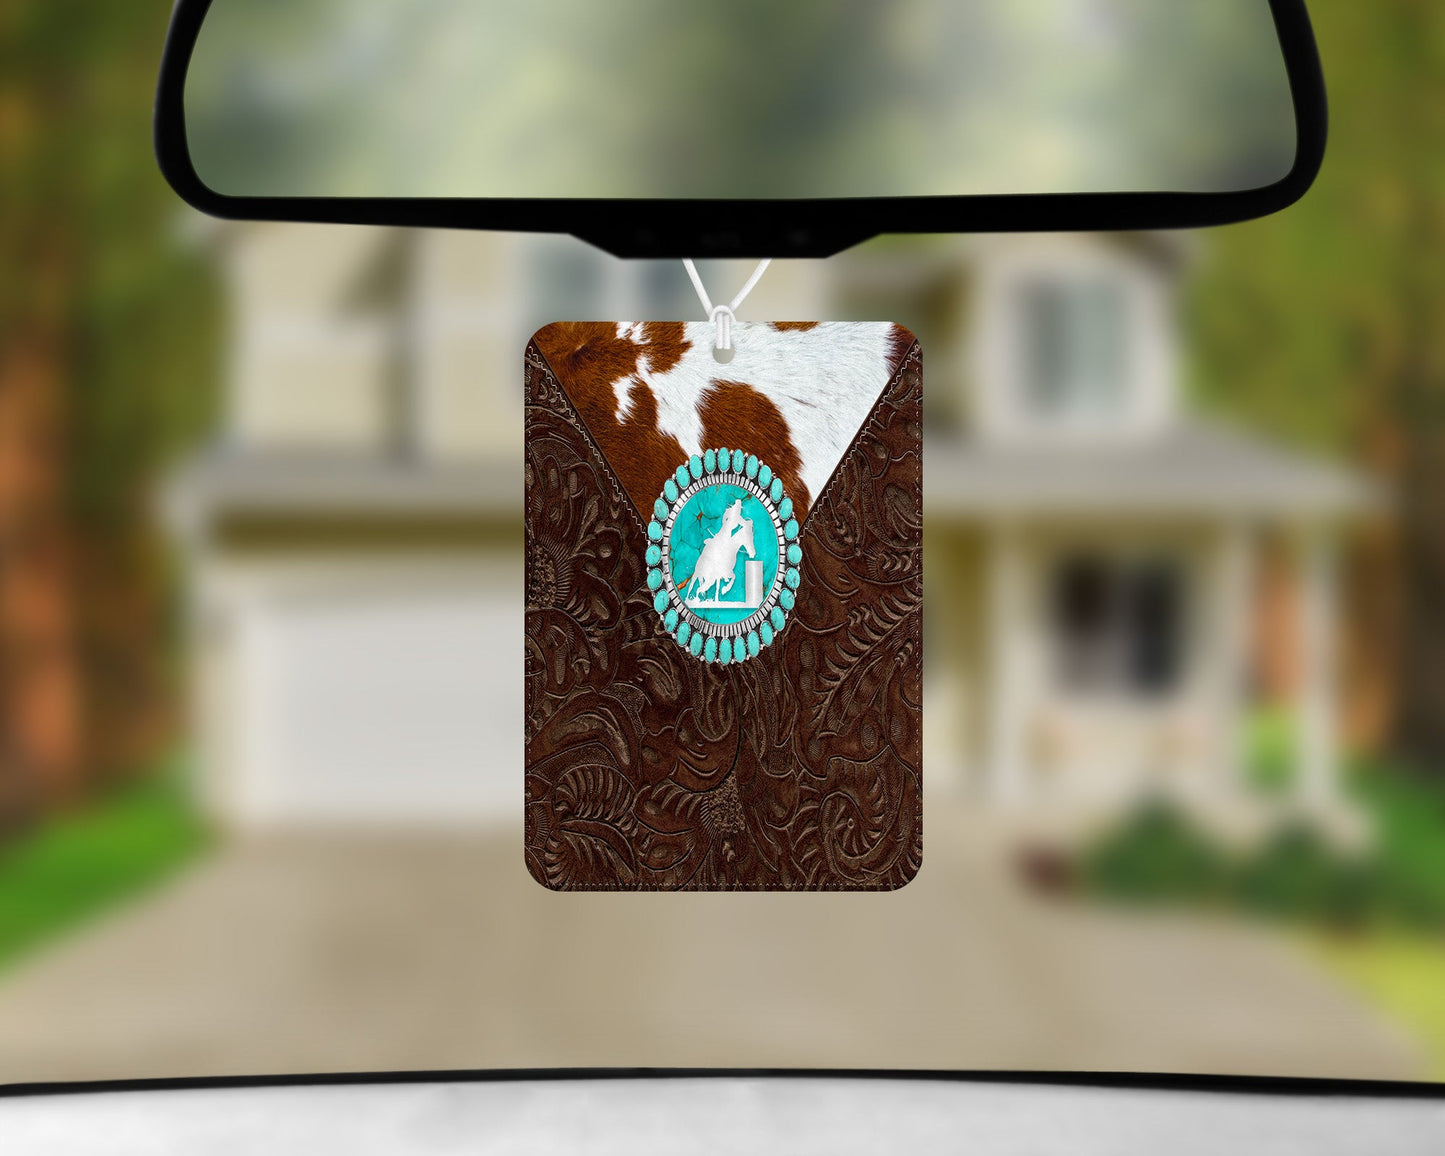 Cowhide Leather Barrel Racer|Freshie|Includes Scent Bottle - Vehicle Air Freshener